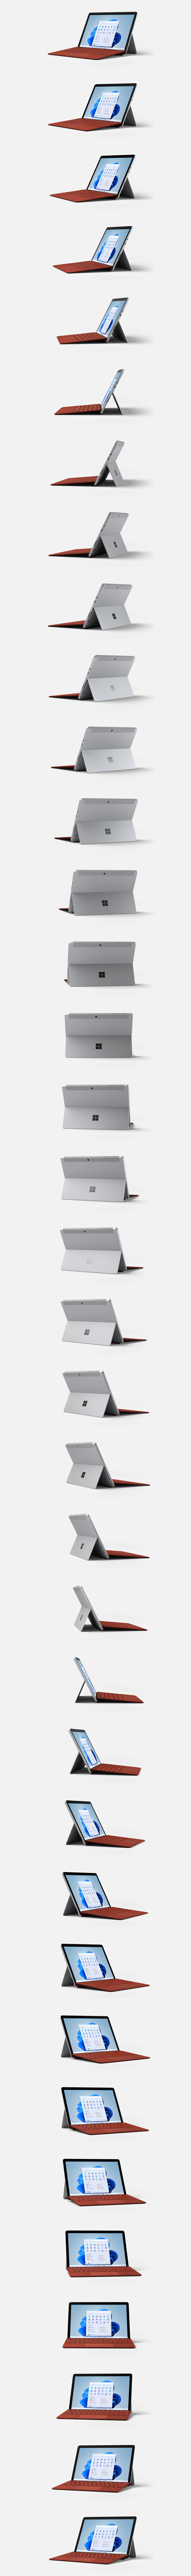 Surface Go 3 for Business.